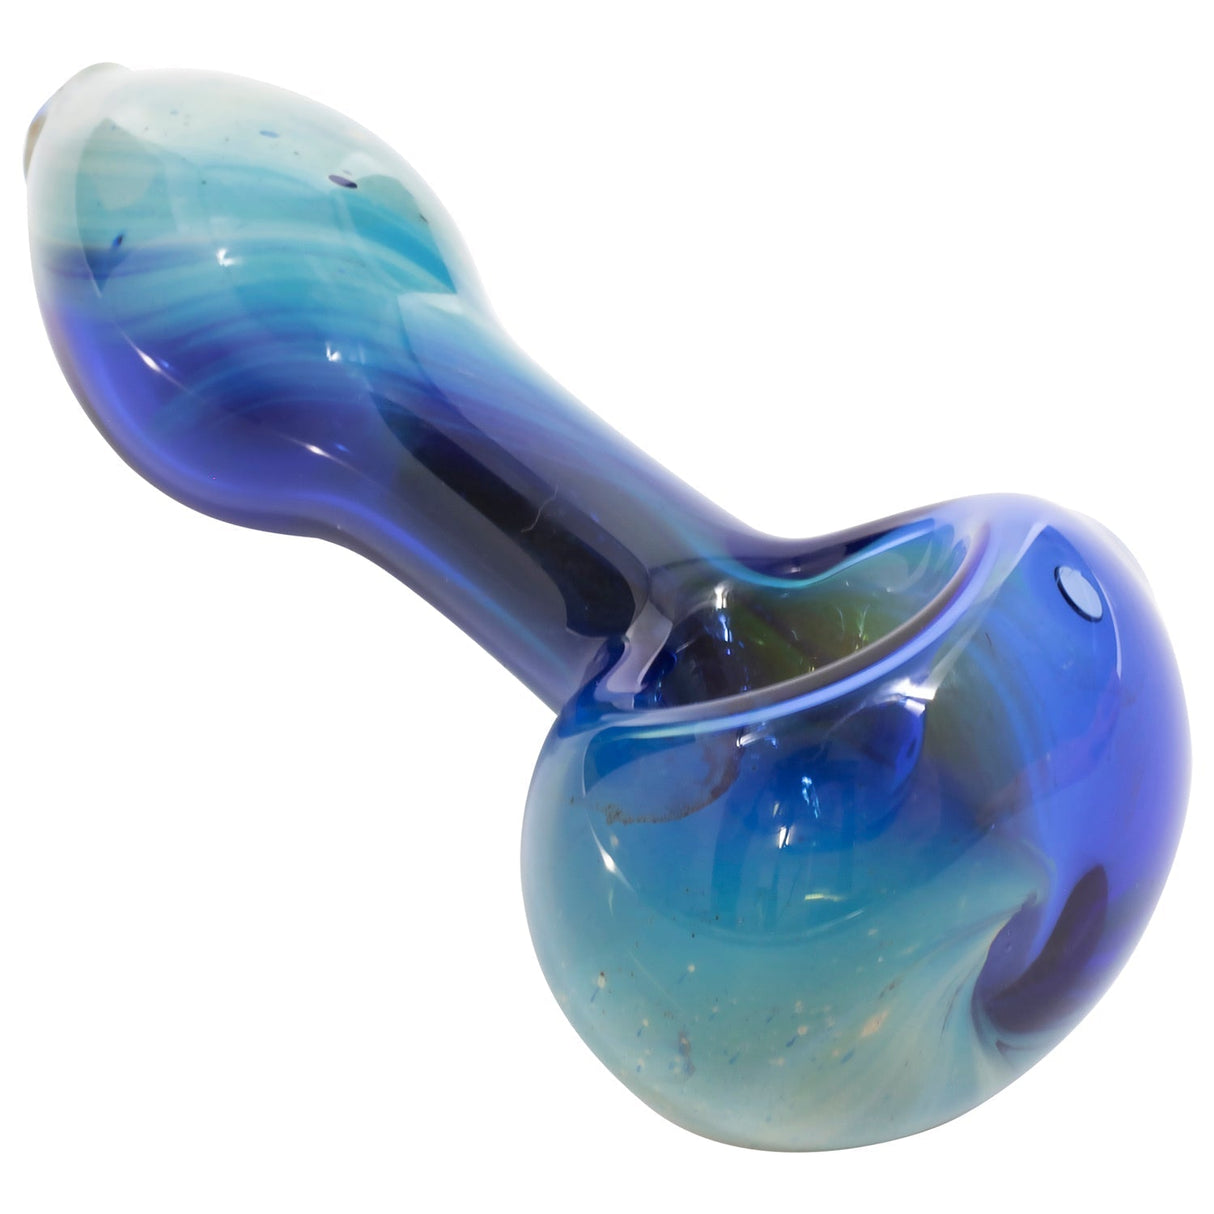 LA Pipes Nebula Spoon Hand Pipe in Borosilicate Glass with Compact Sidecar Design